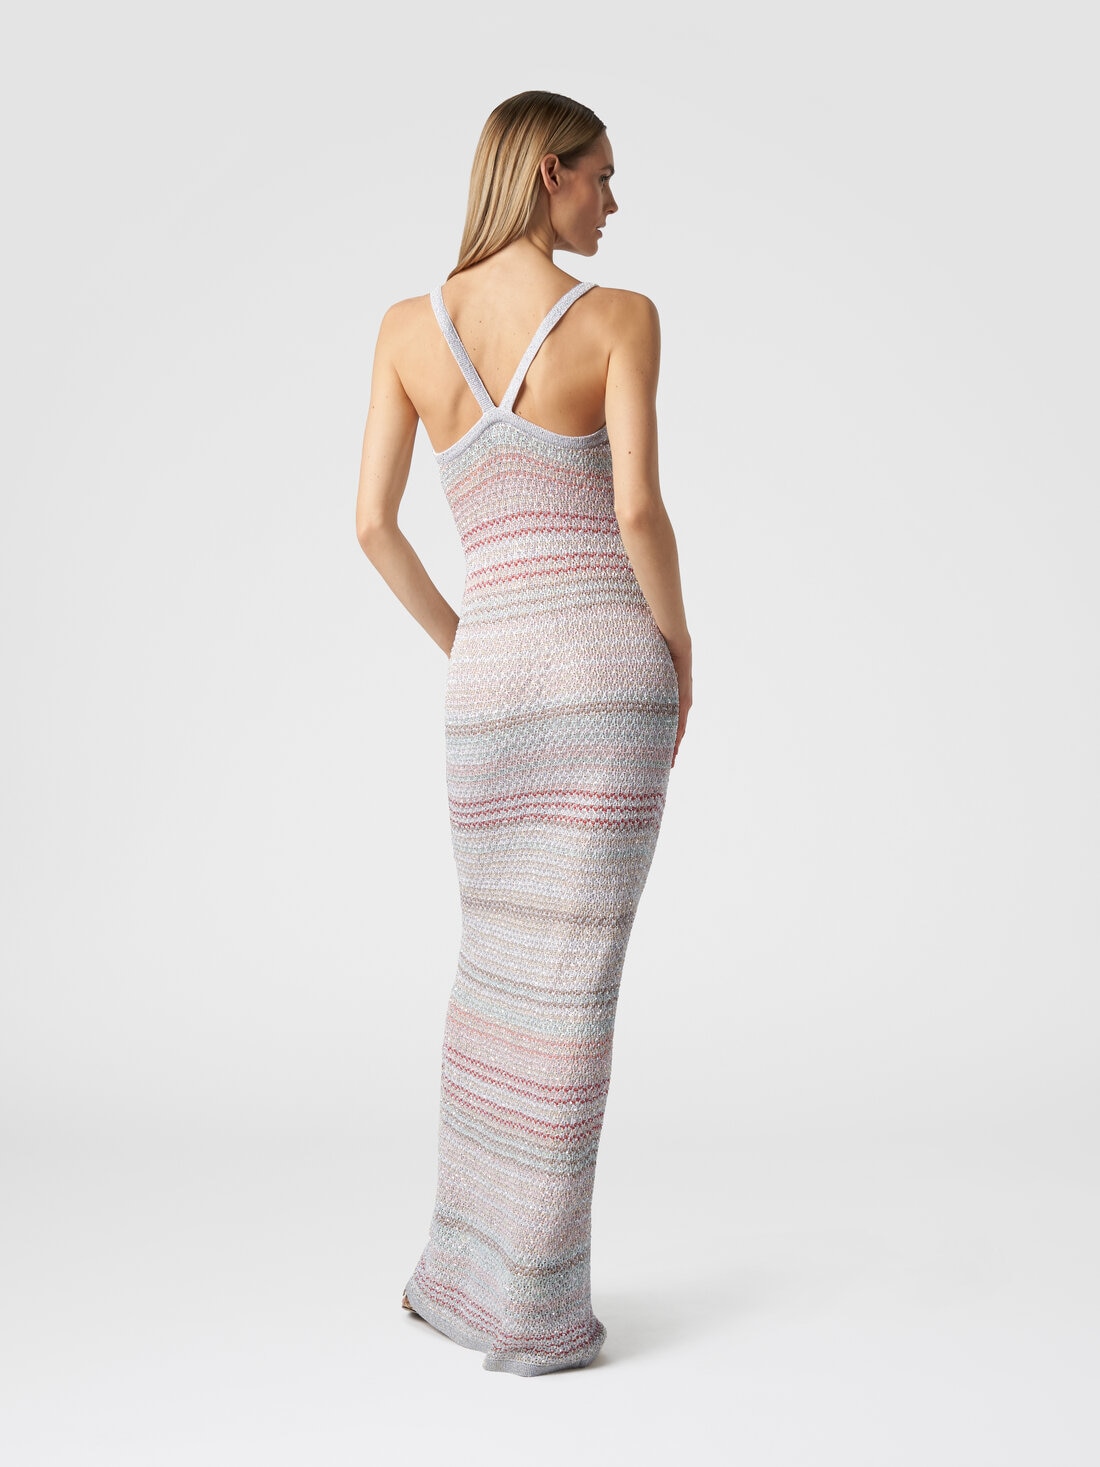 Long dress in zigzag knit with crochet-effect weave, Multicoloured  - DS24SG14BK033PSM9AI - 2